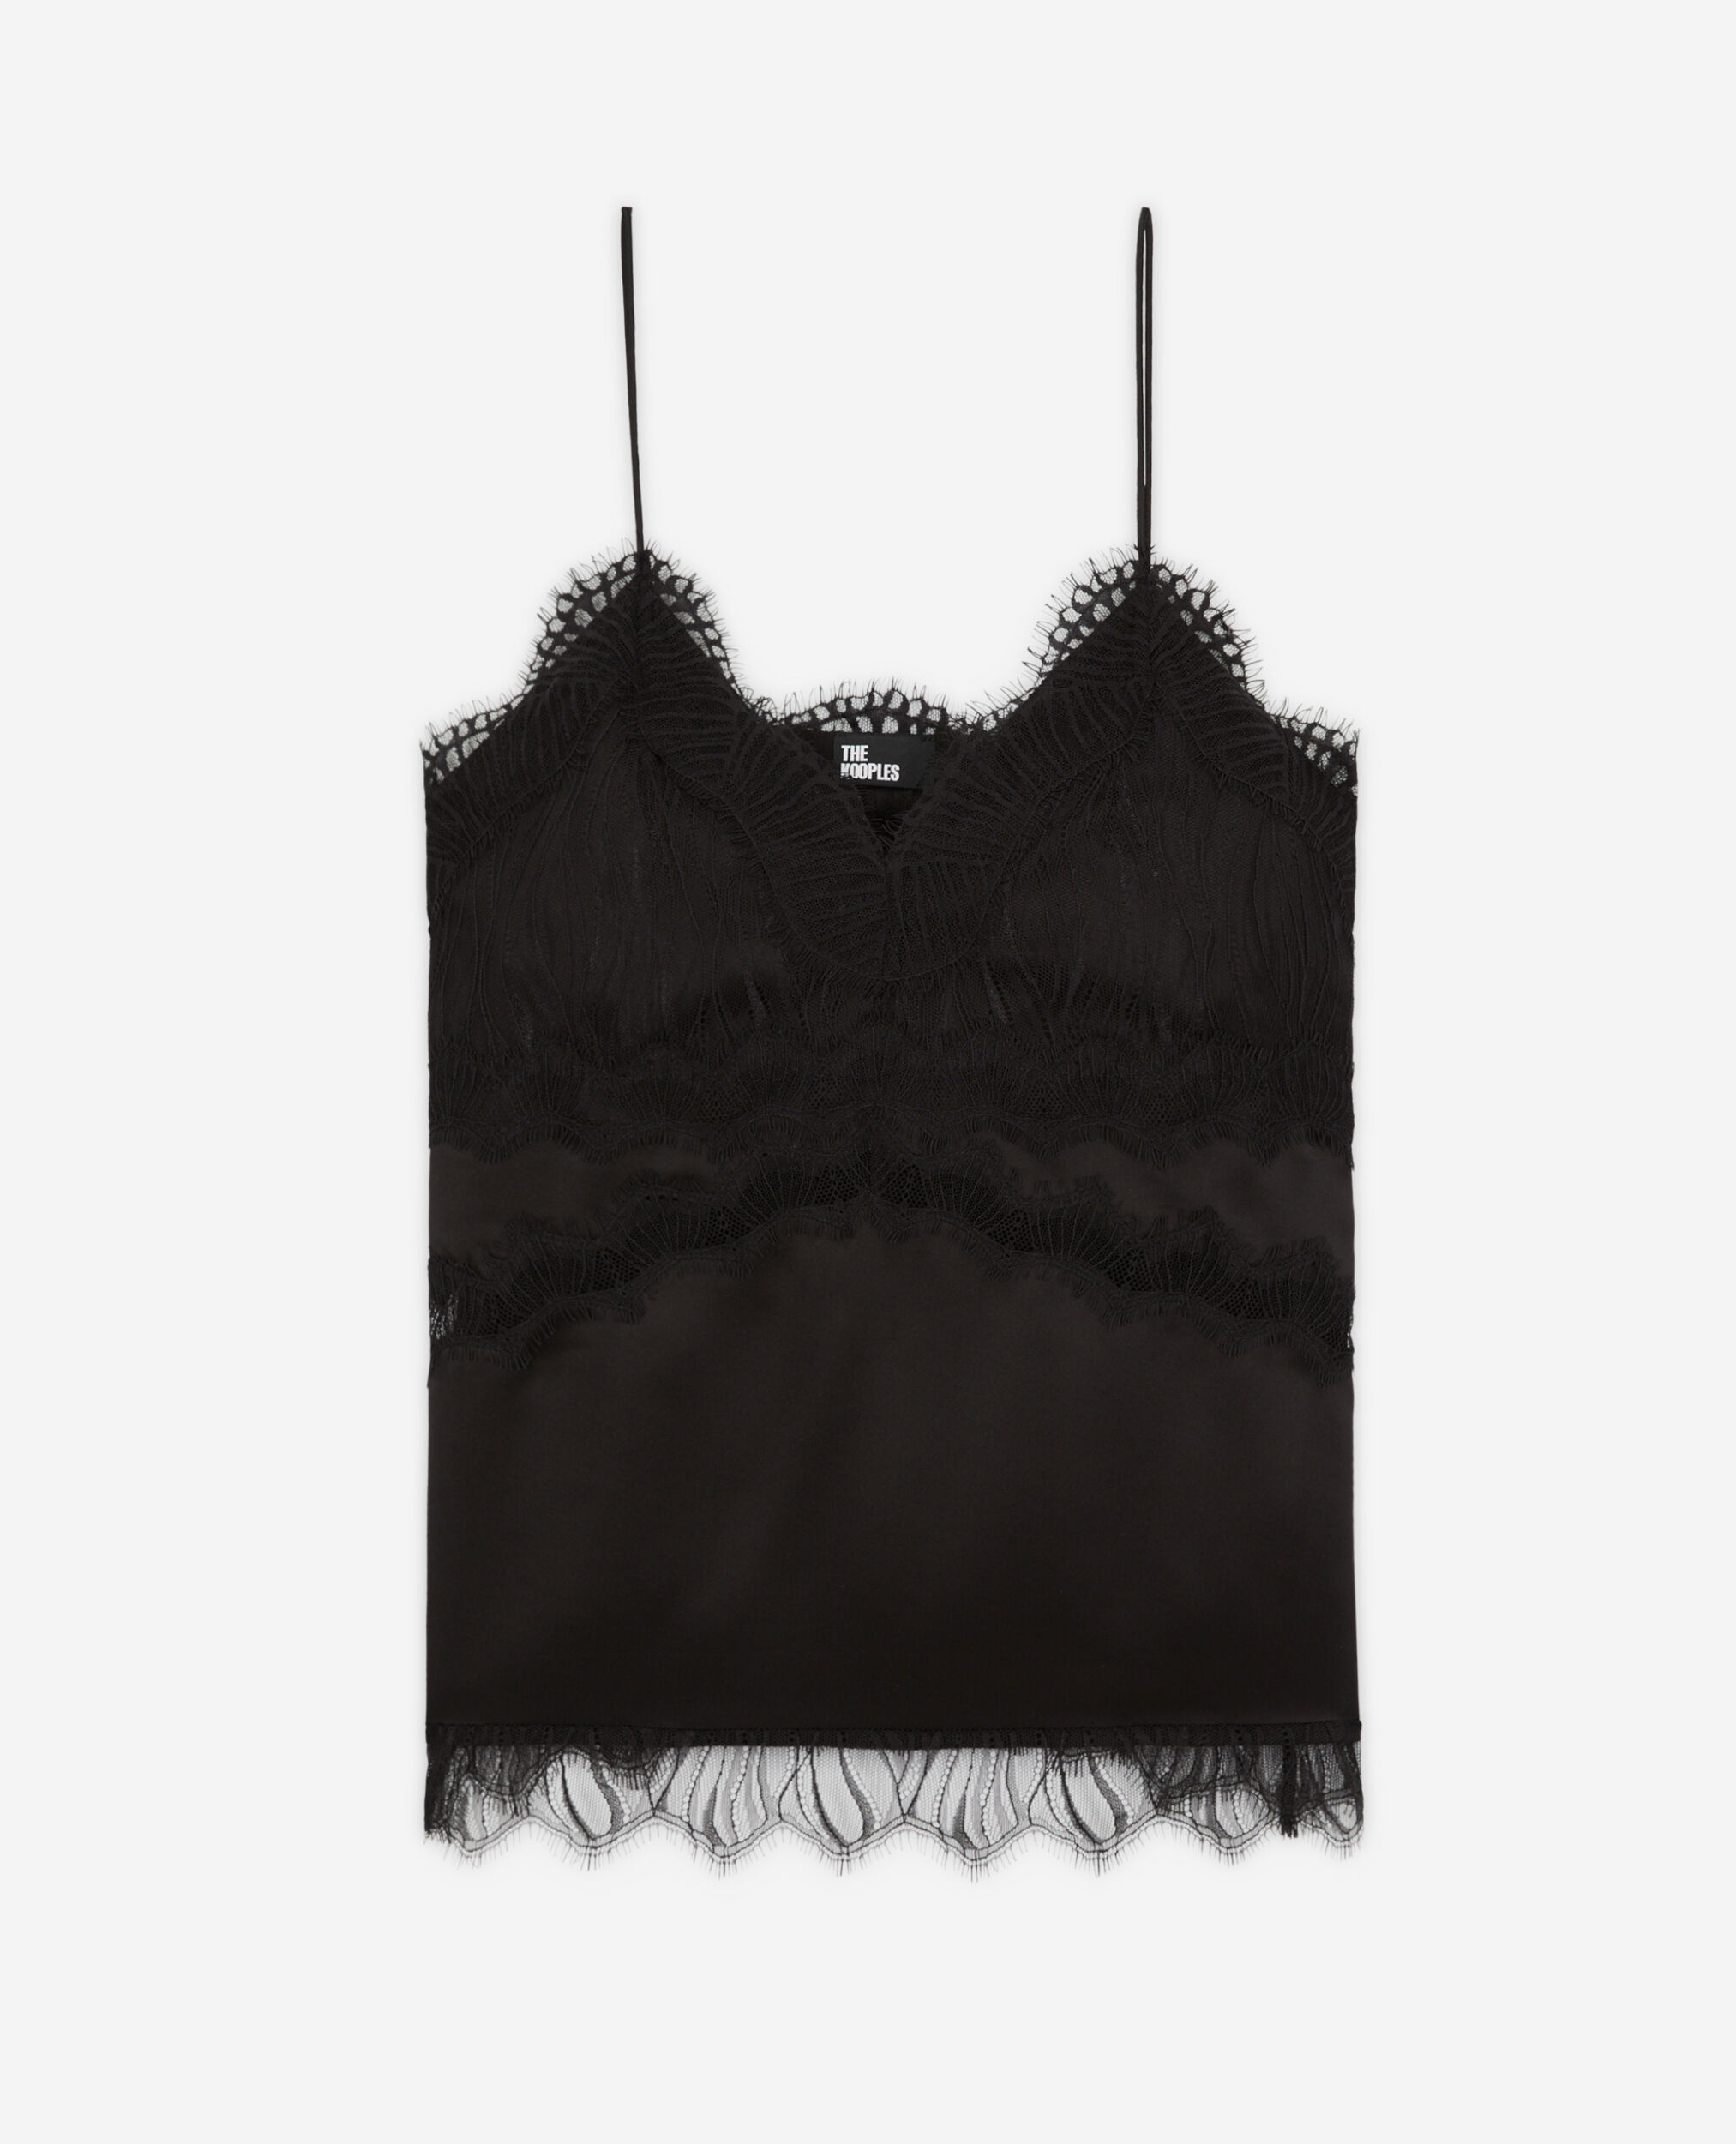 Black camisole with lace details, BLACK, hi-res image number null